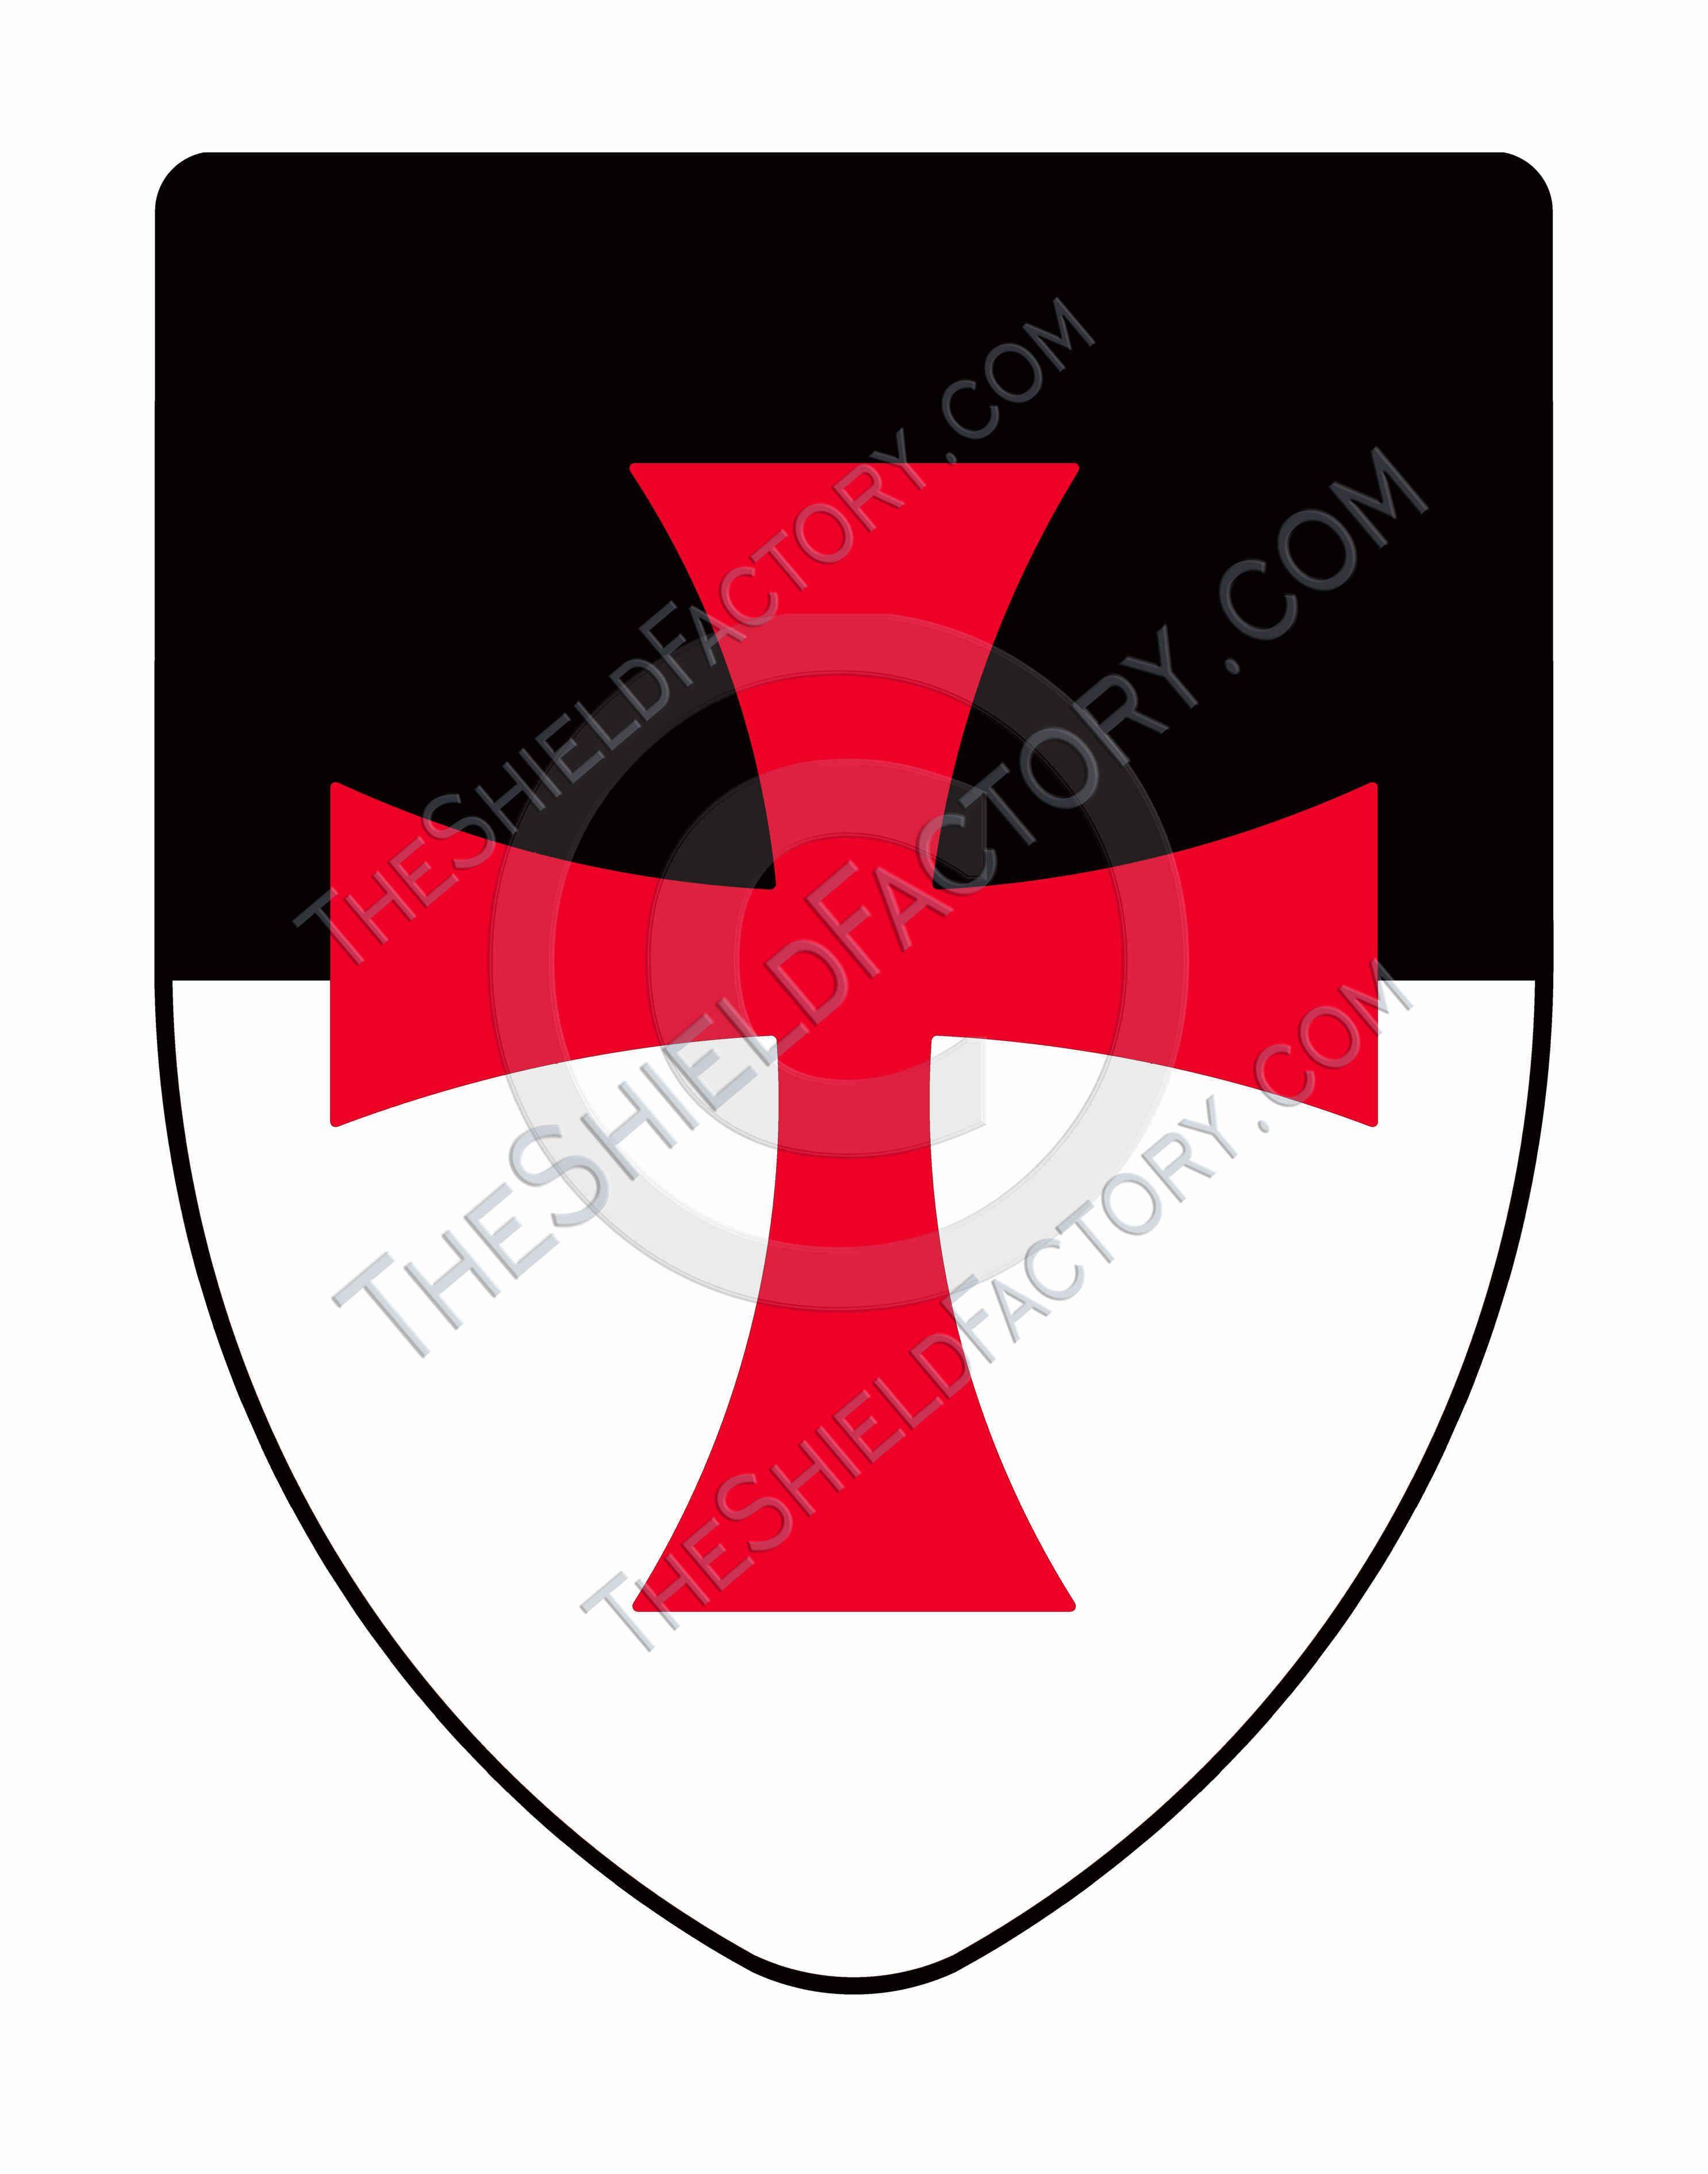 White Cross with Red Shield Logo - Templar Knights Medieval Shield, Hand Painted